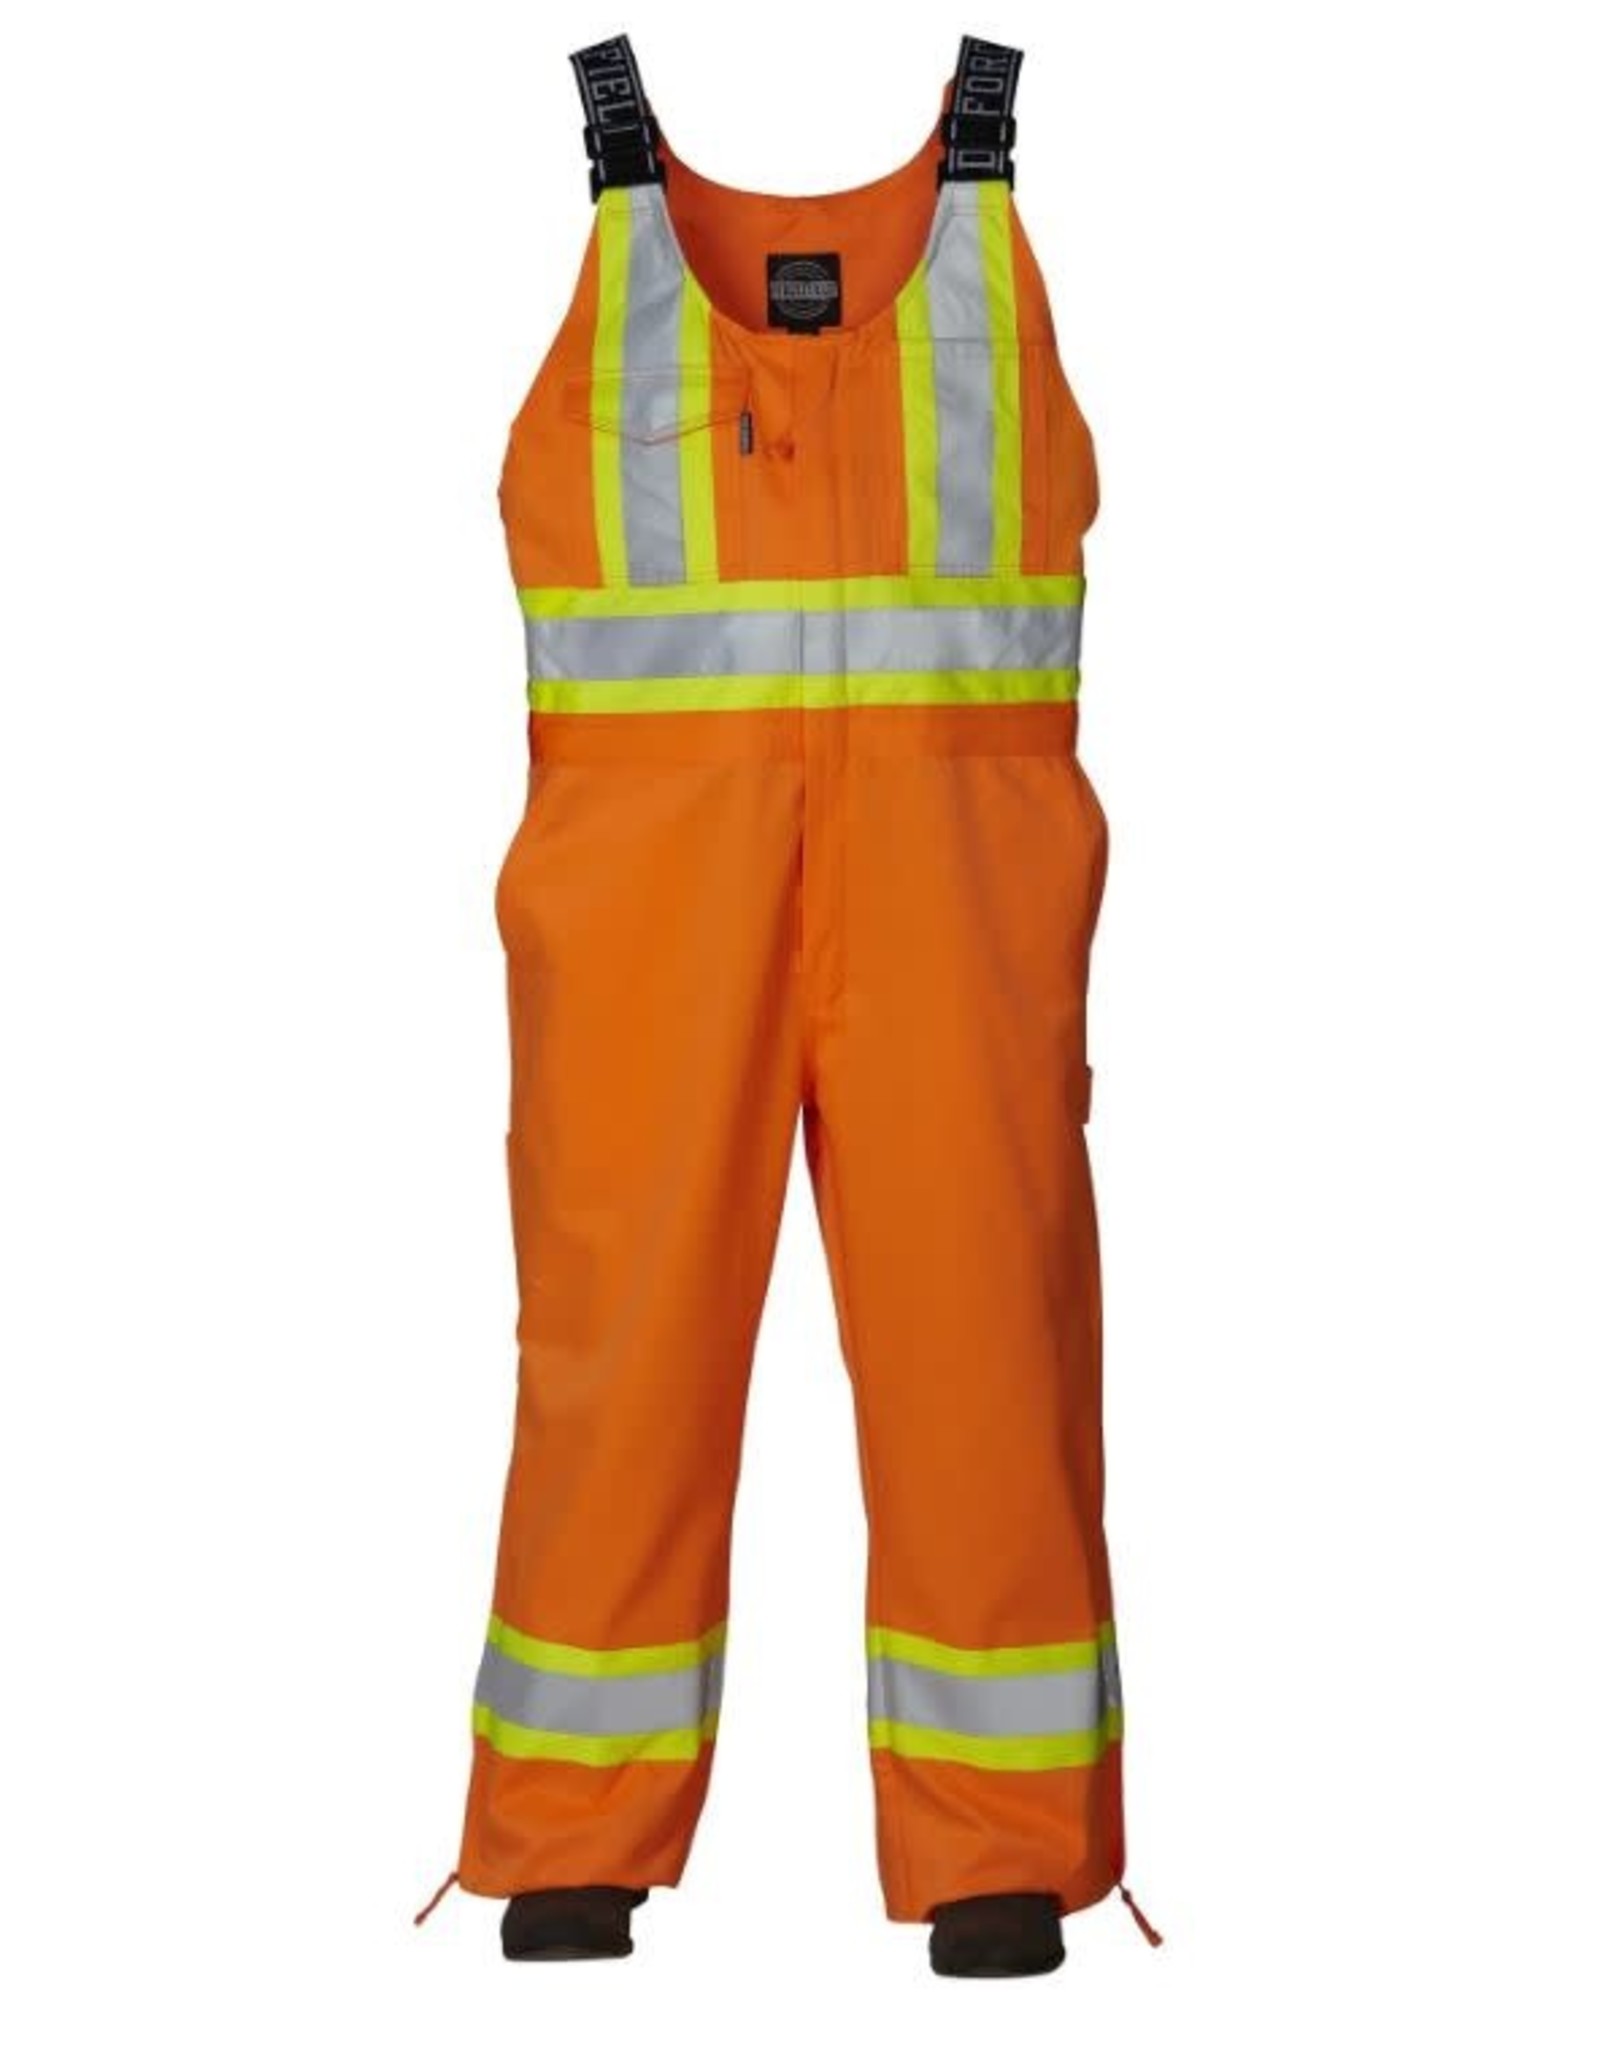 Forcefield High Vis Overall, Class 2, Orange